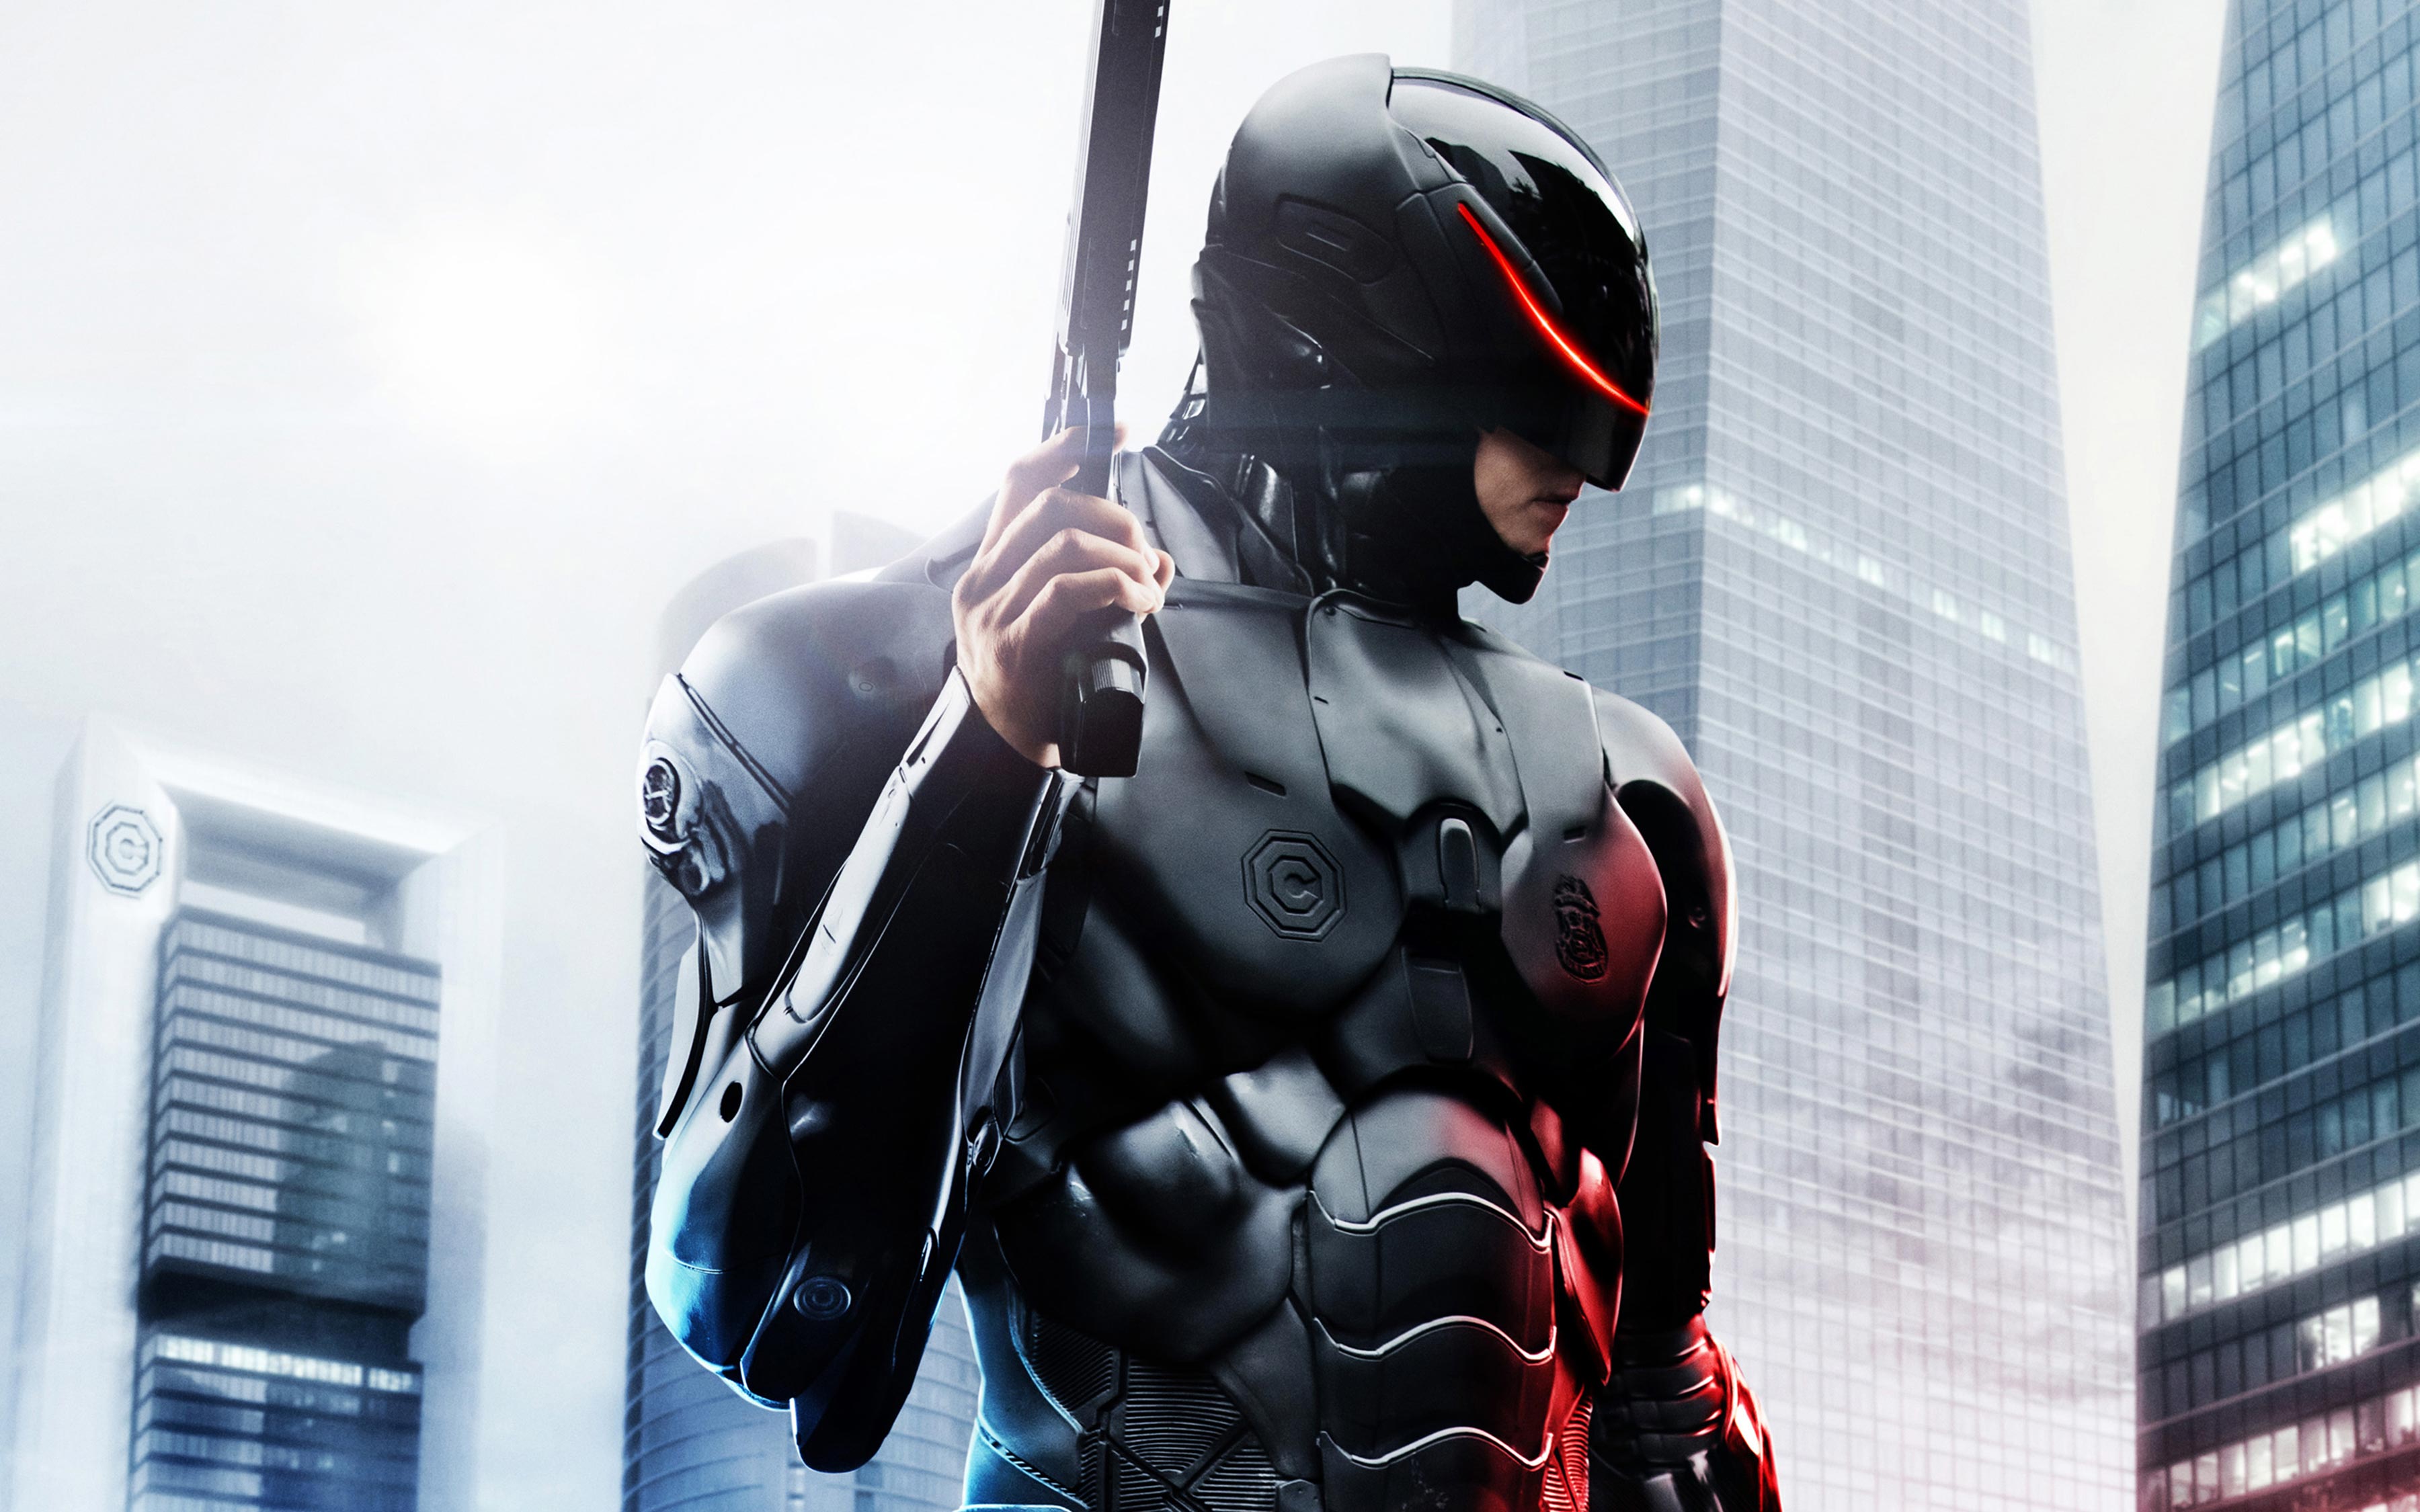 Robocop Movie Wallpapers[HD Timeline Covers